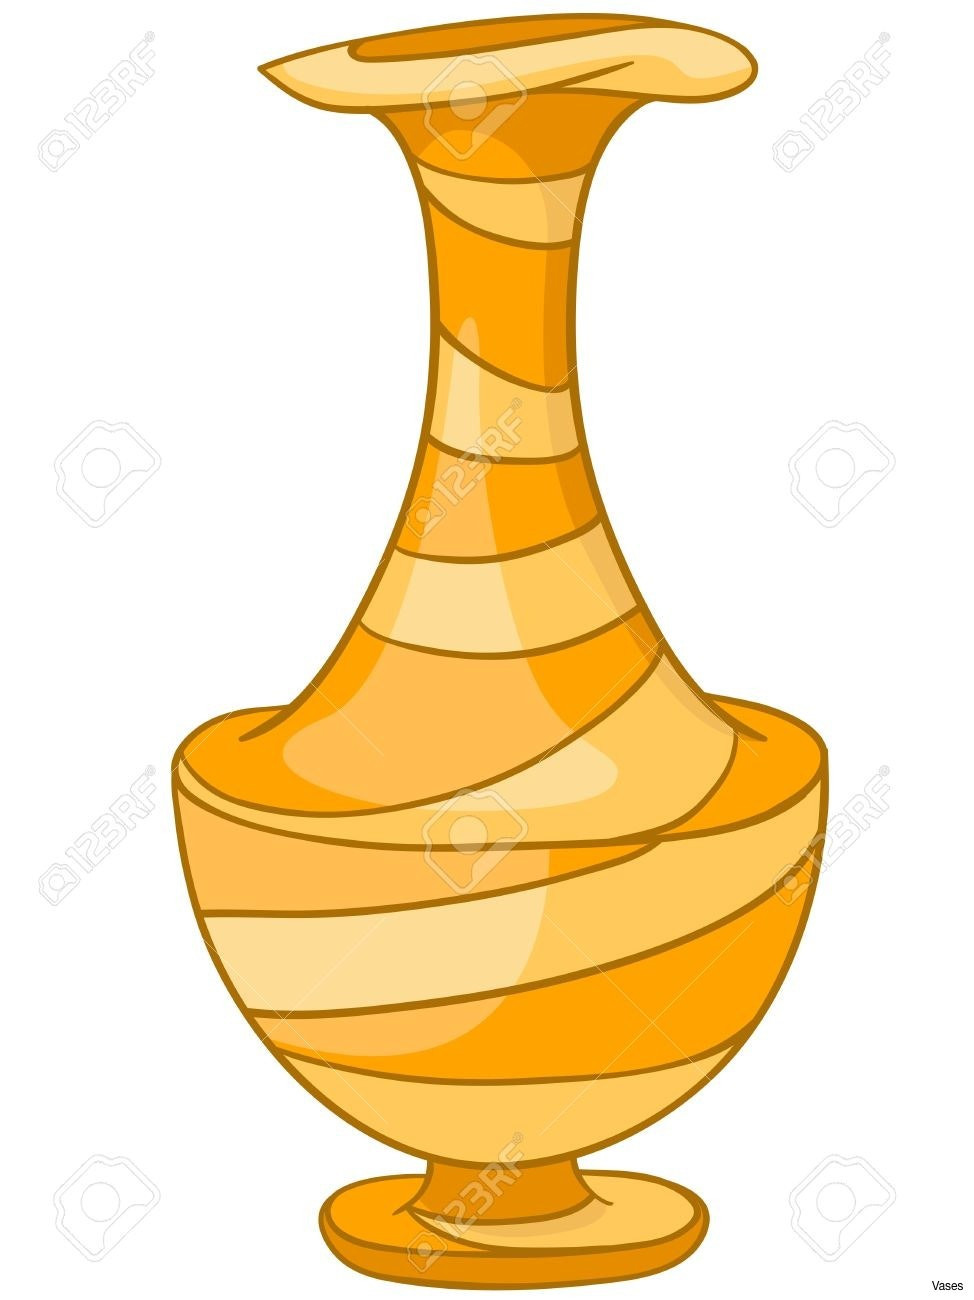 10 Unique Big White Vase 2024 free download big white vase of will clipart colored flower vase clip arth vases art infoi 0d of for in will clipart colored flower vase clip arth vases art infoi 0d of for clipart of vase